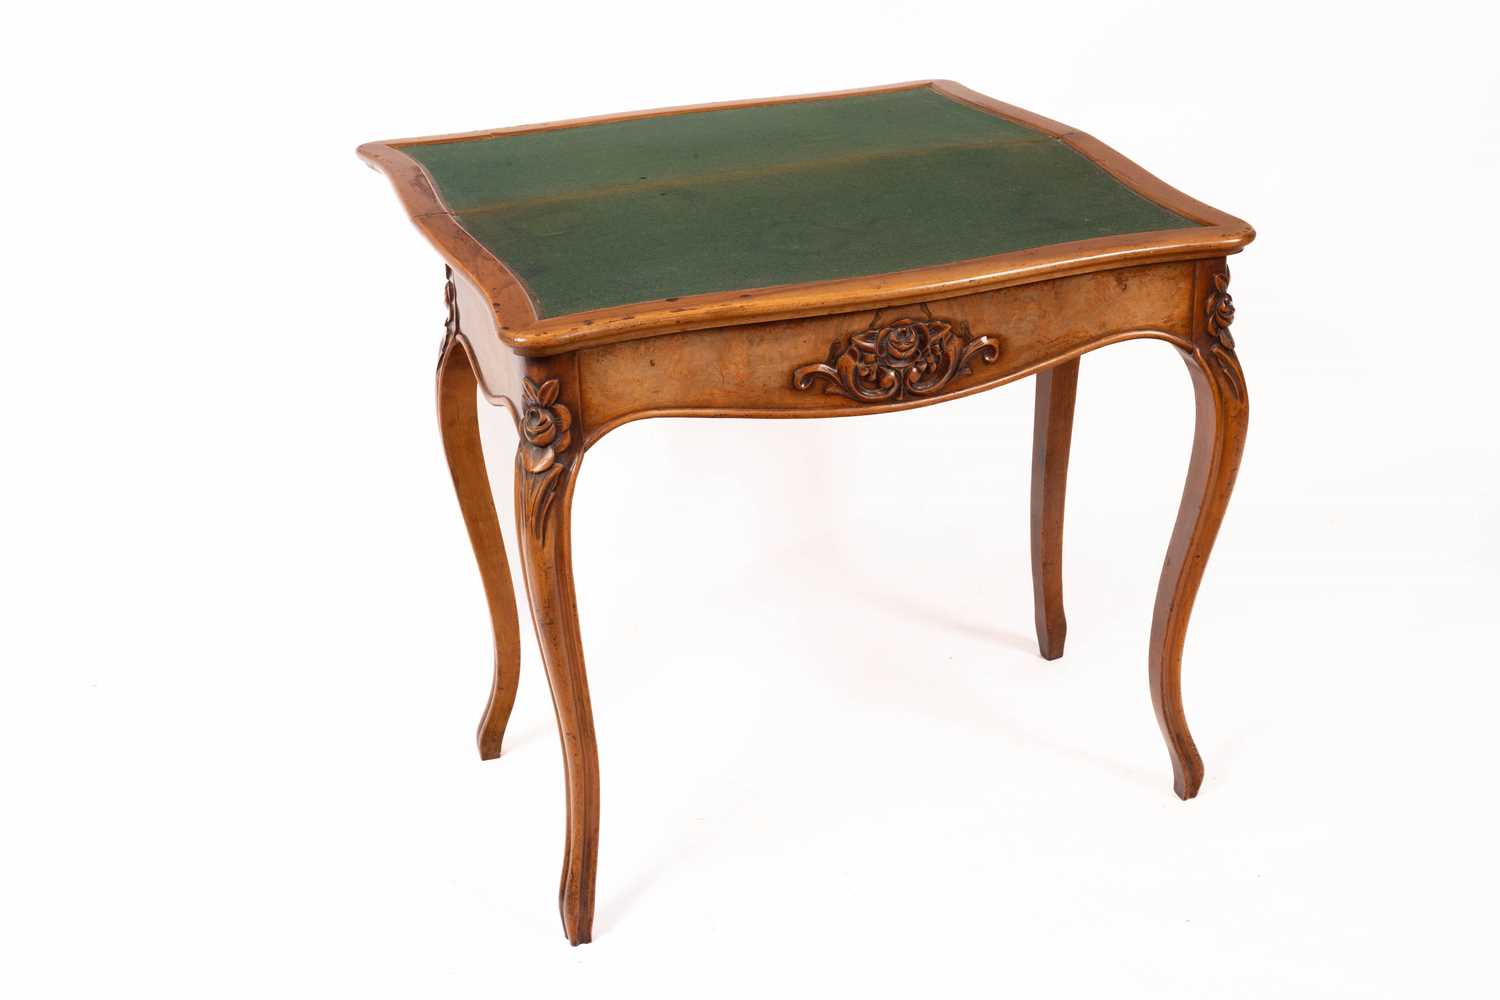 A Victorian beech and burr walnut veneered fold out card table - Image 2 of 2